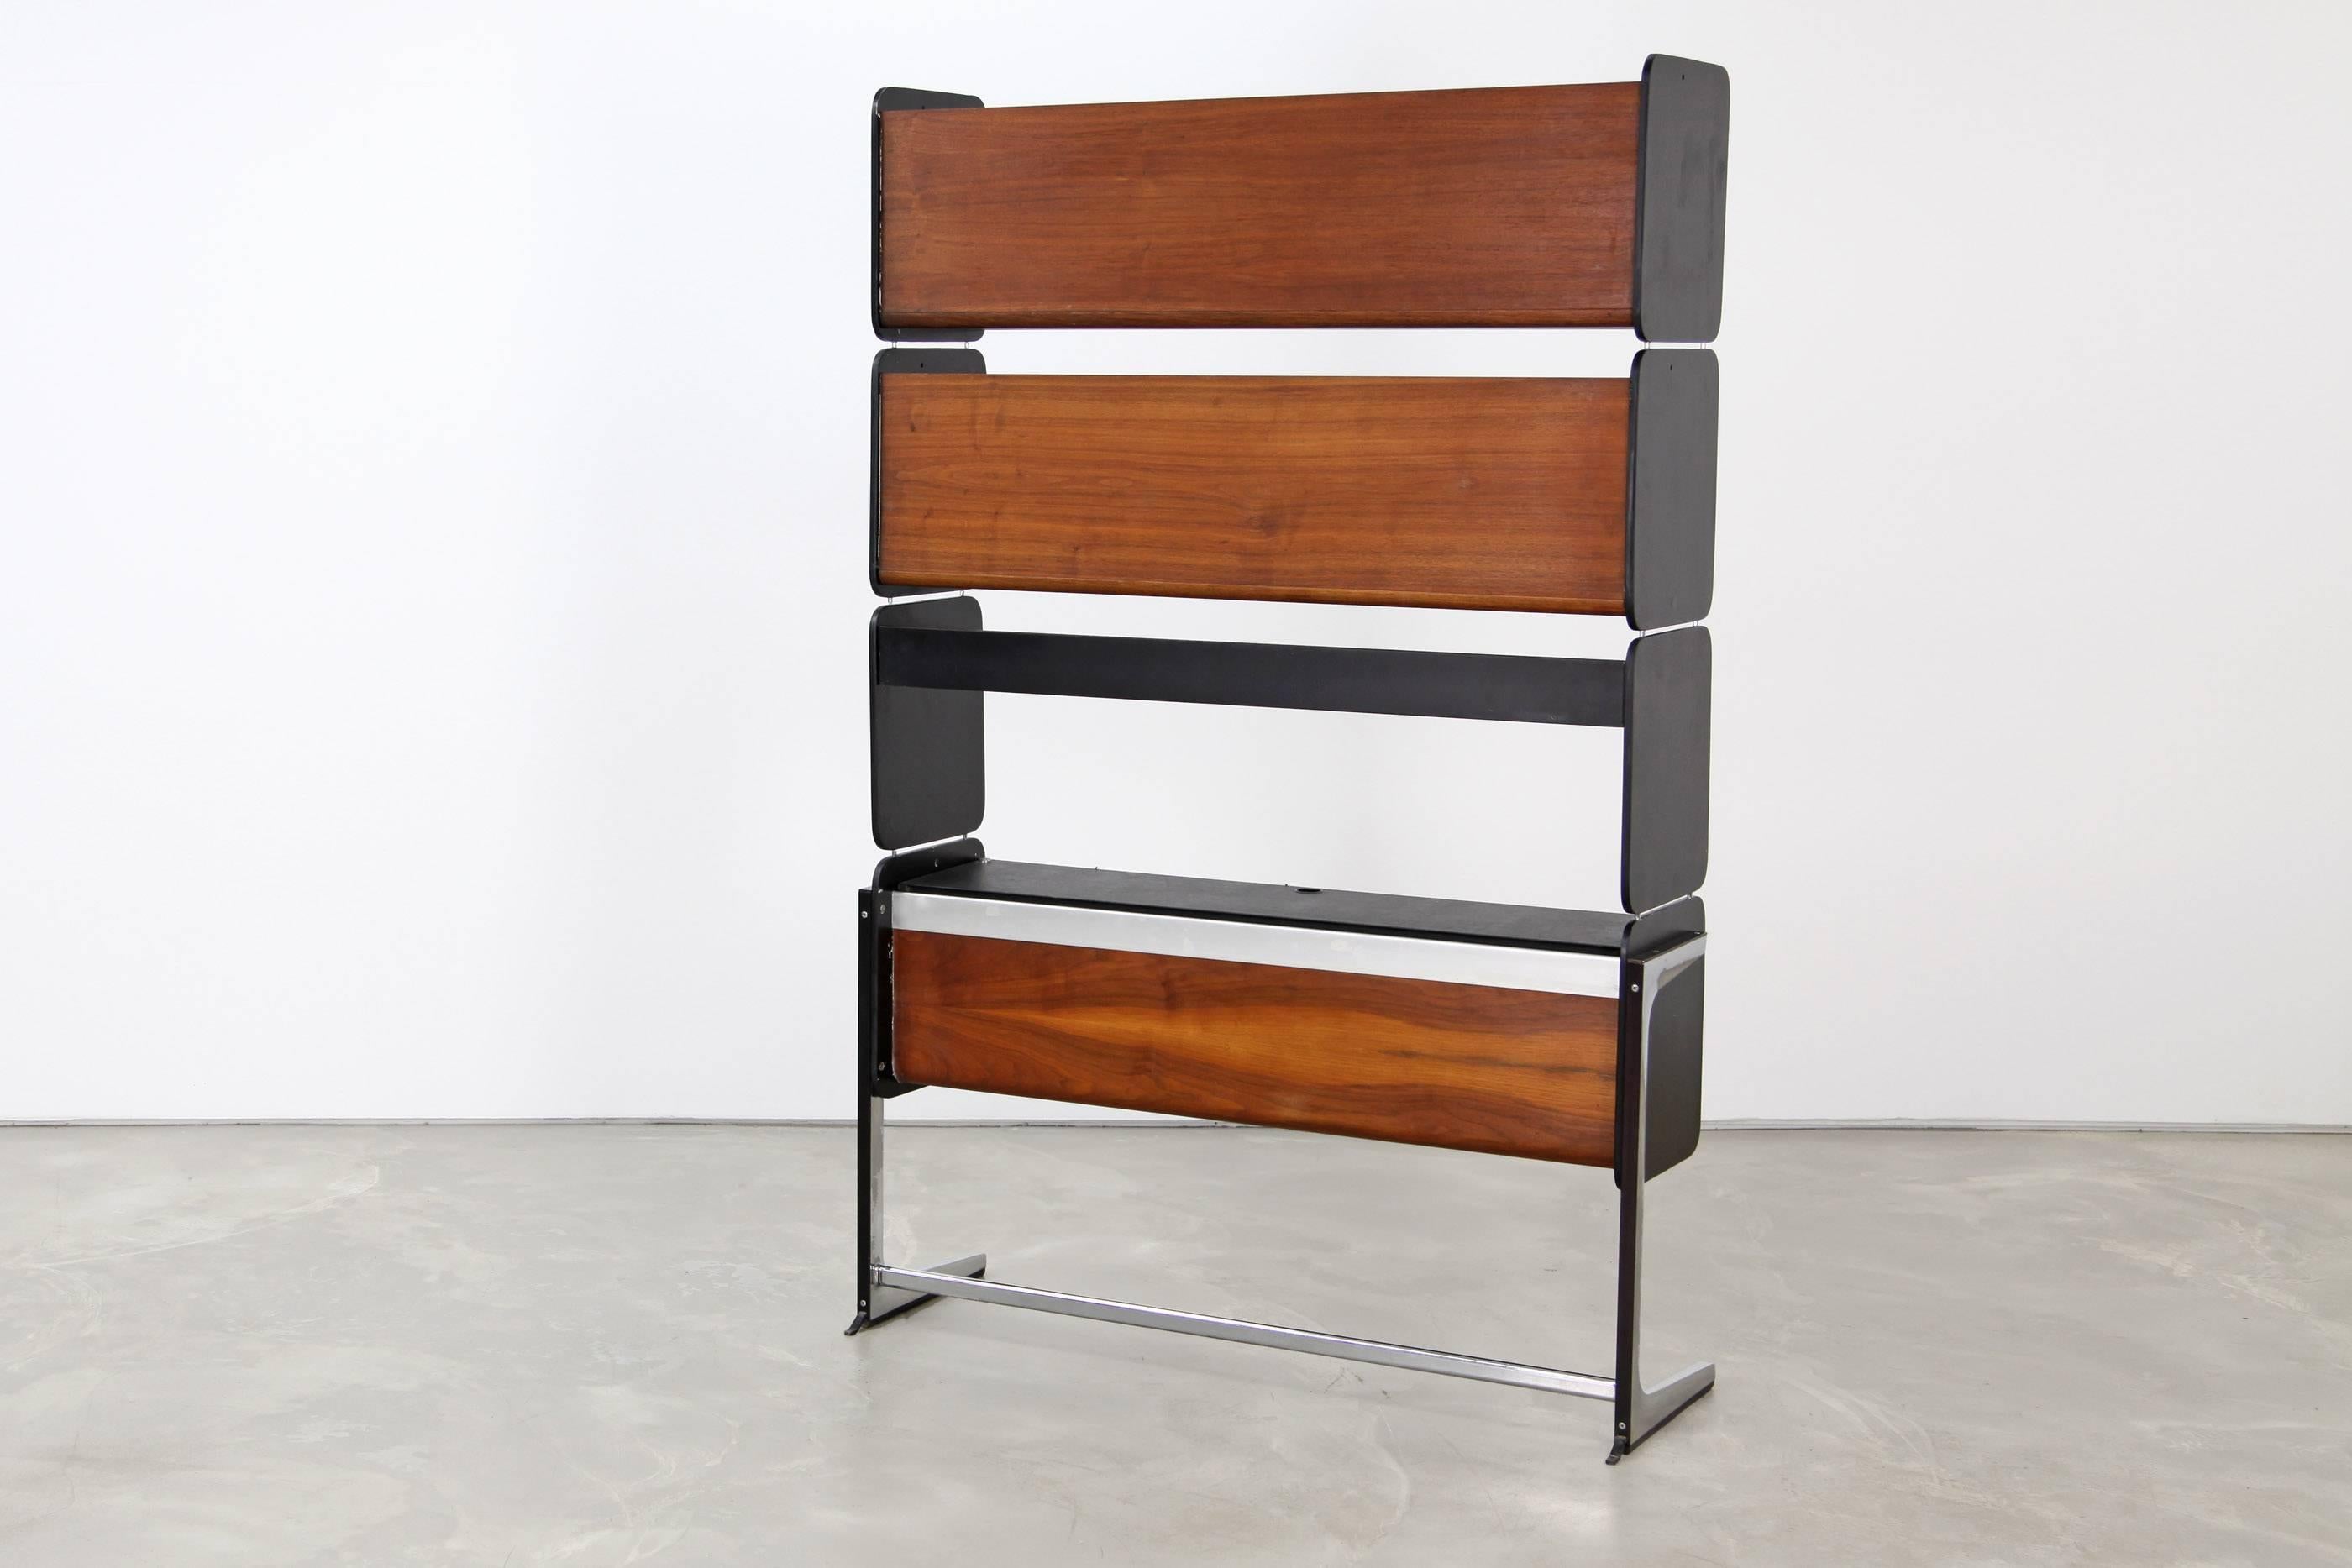 American Action Office Teak Shelf by George Nelson for Herman Miller, 1964